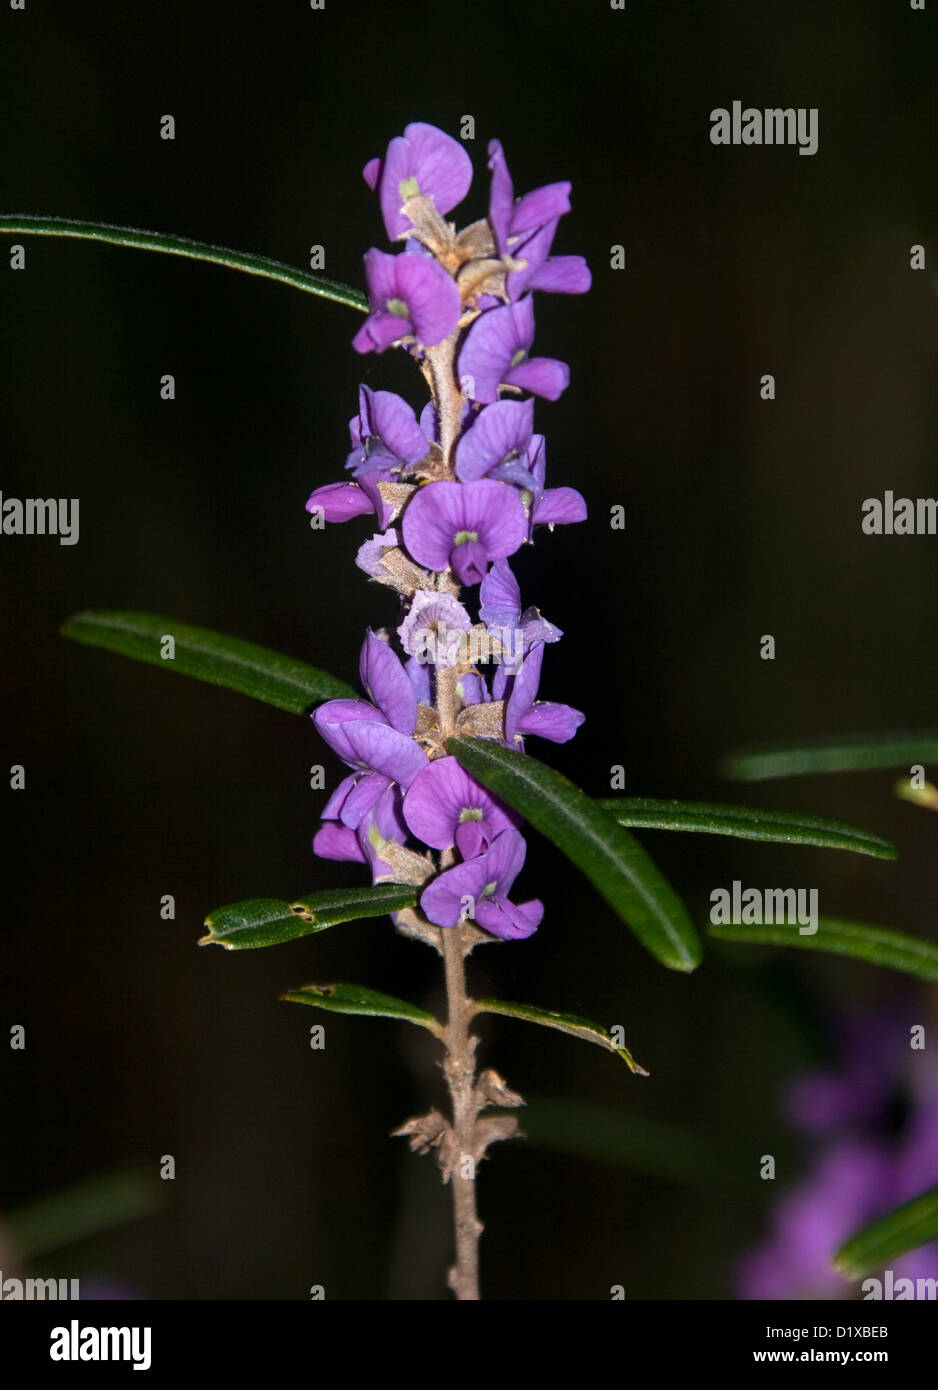 Bright purple flowers and leaves of Hovea longifolia - Australian wildflowers - against a black background Stock Photo